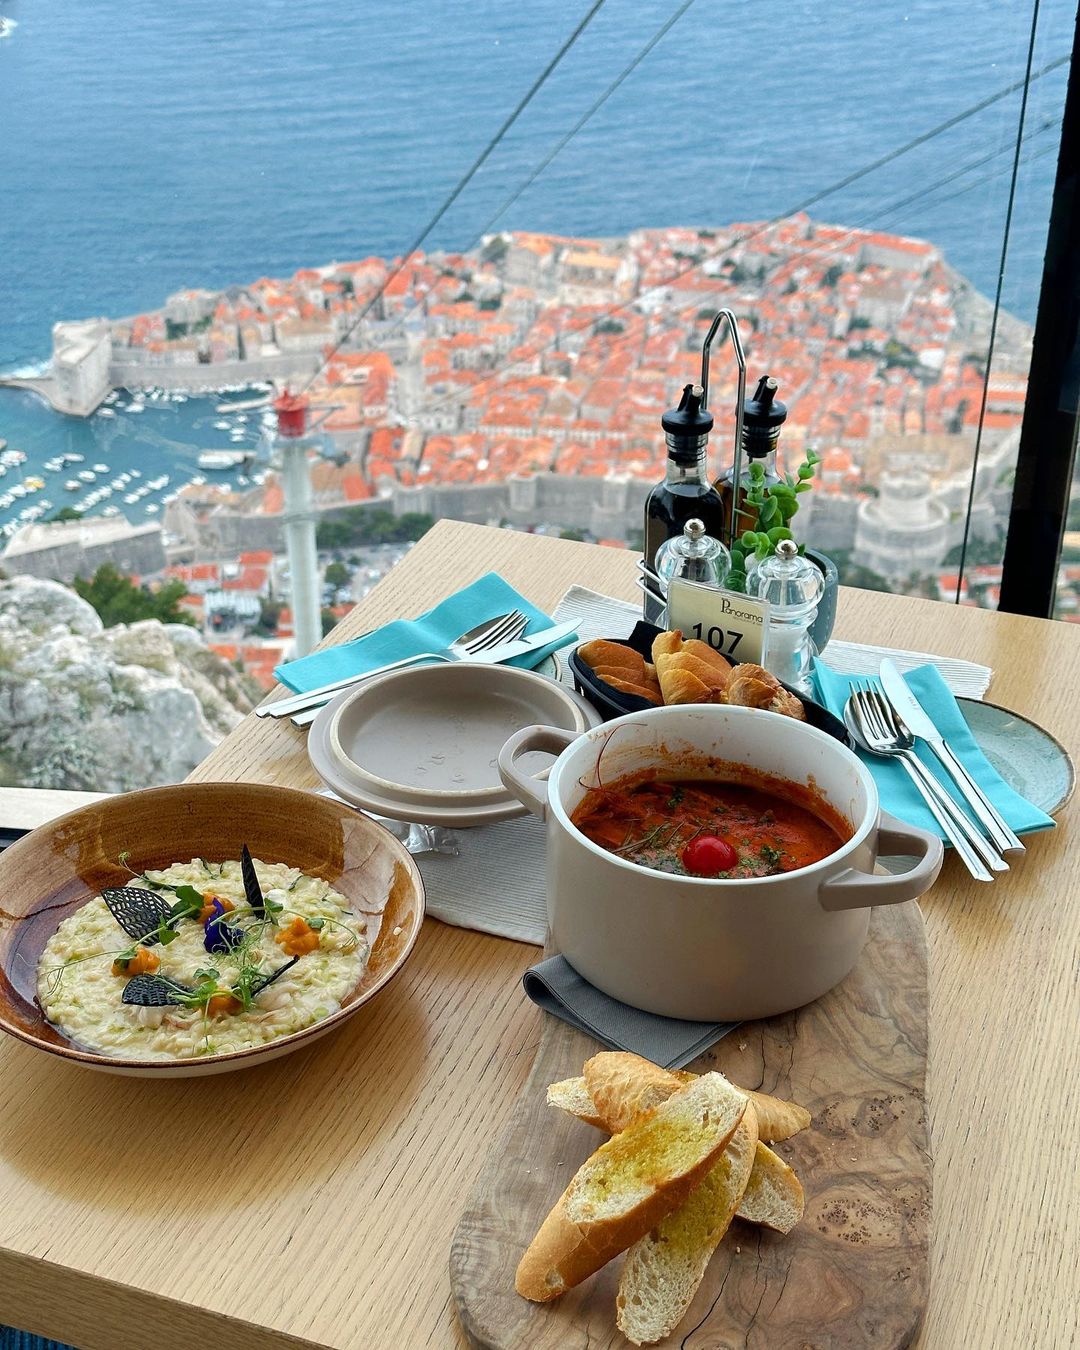 Enjoy the view, while also enjoying your food in Dubrovnik` s Panorama restaurant